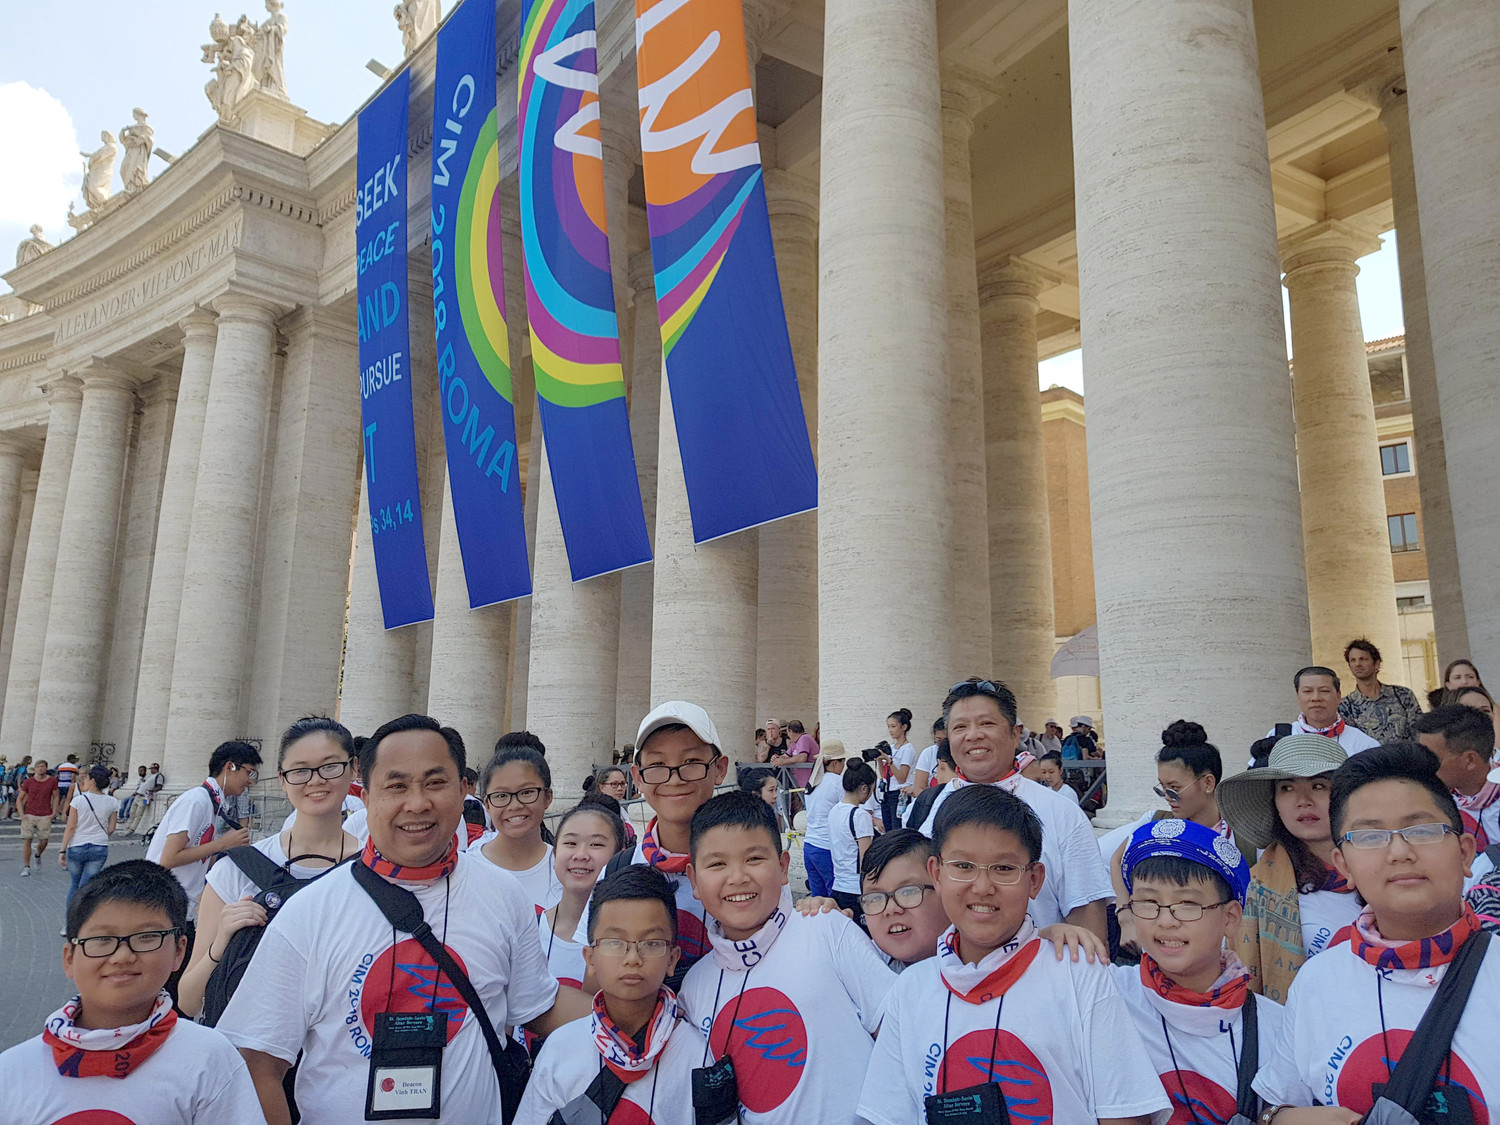 Deacon Vinh Tran, second from left, poses in St. Peter’s Square at the Vatican July 31 with some of the 85 children and parents from the parish of Mary, Queen of Vietnam in New Orleans, Louisiana attending an international pilgrimage of altar servers. The pilgrimage, sponsored by the German bishops’ conference, included tens of thousands of Germans ages 13 to 23 and altar servers from 18 countries.